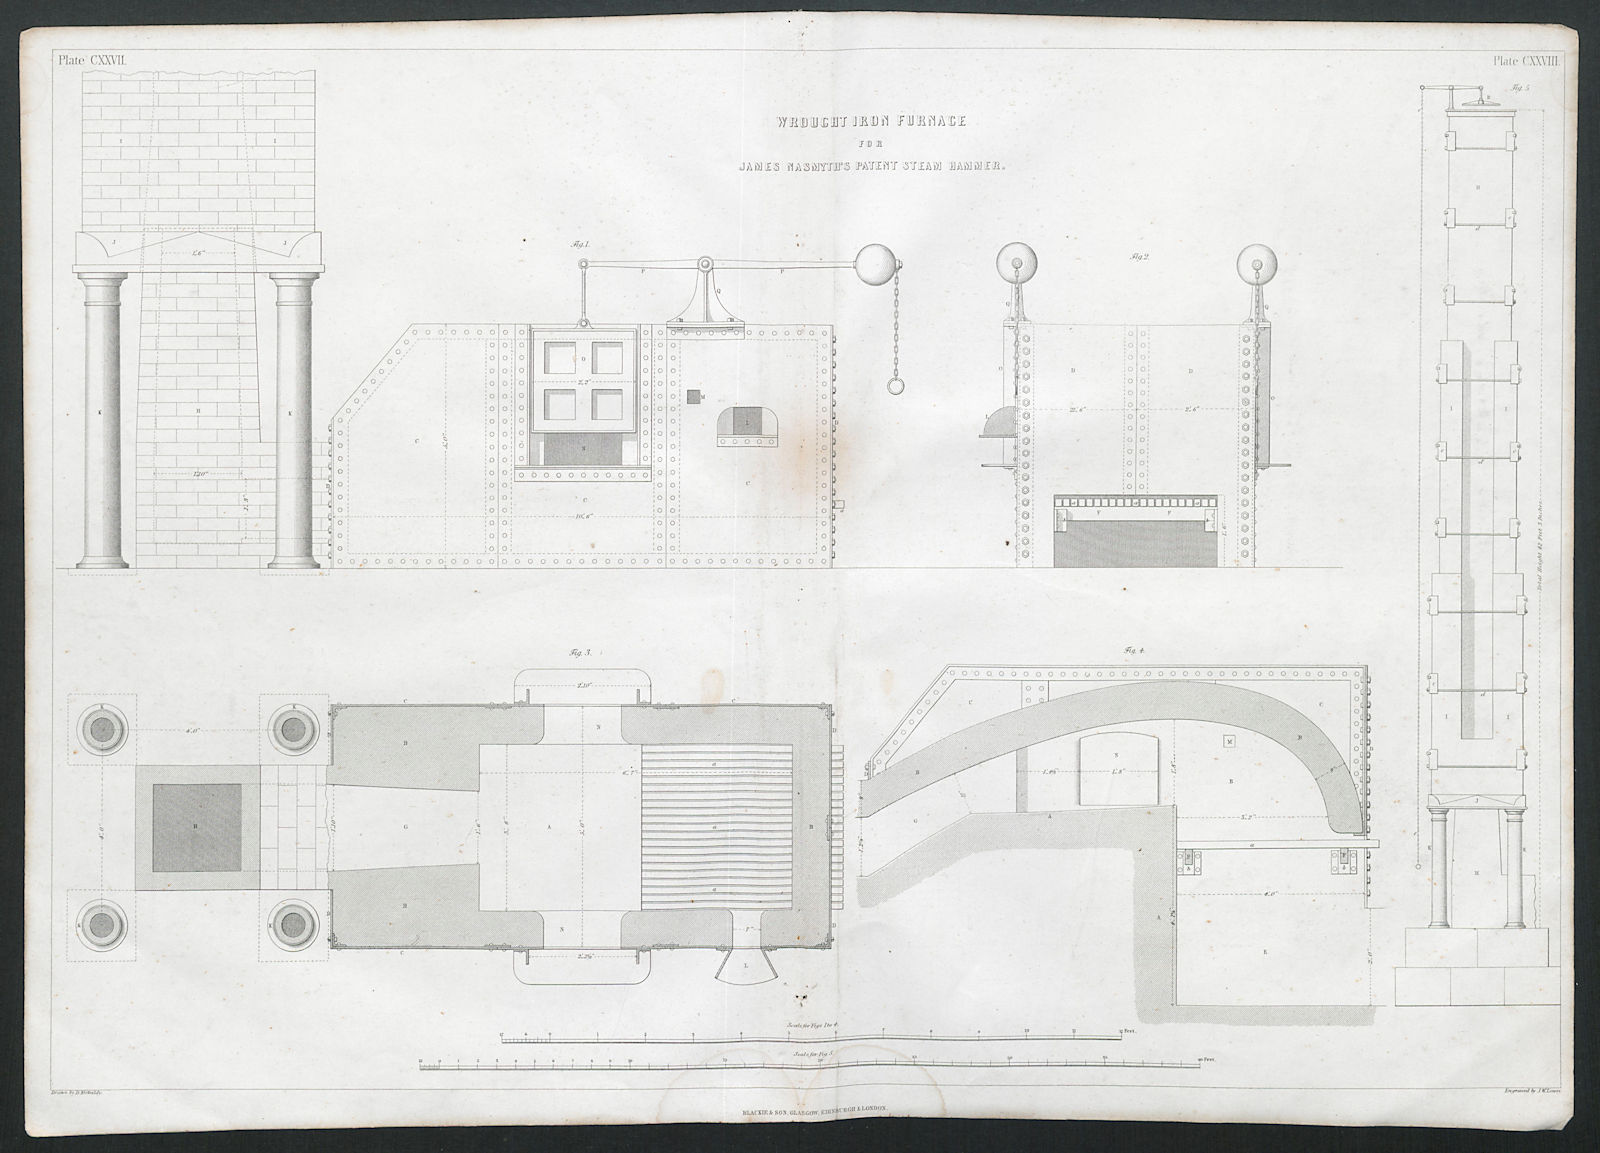 19C ENGINEERING DRAWING Wrought iron furnace. Nasmyth's patent steam hammer 1847